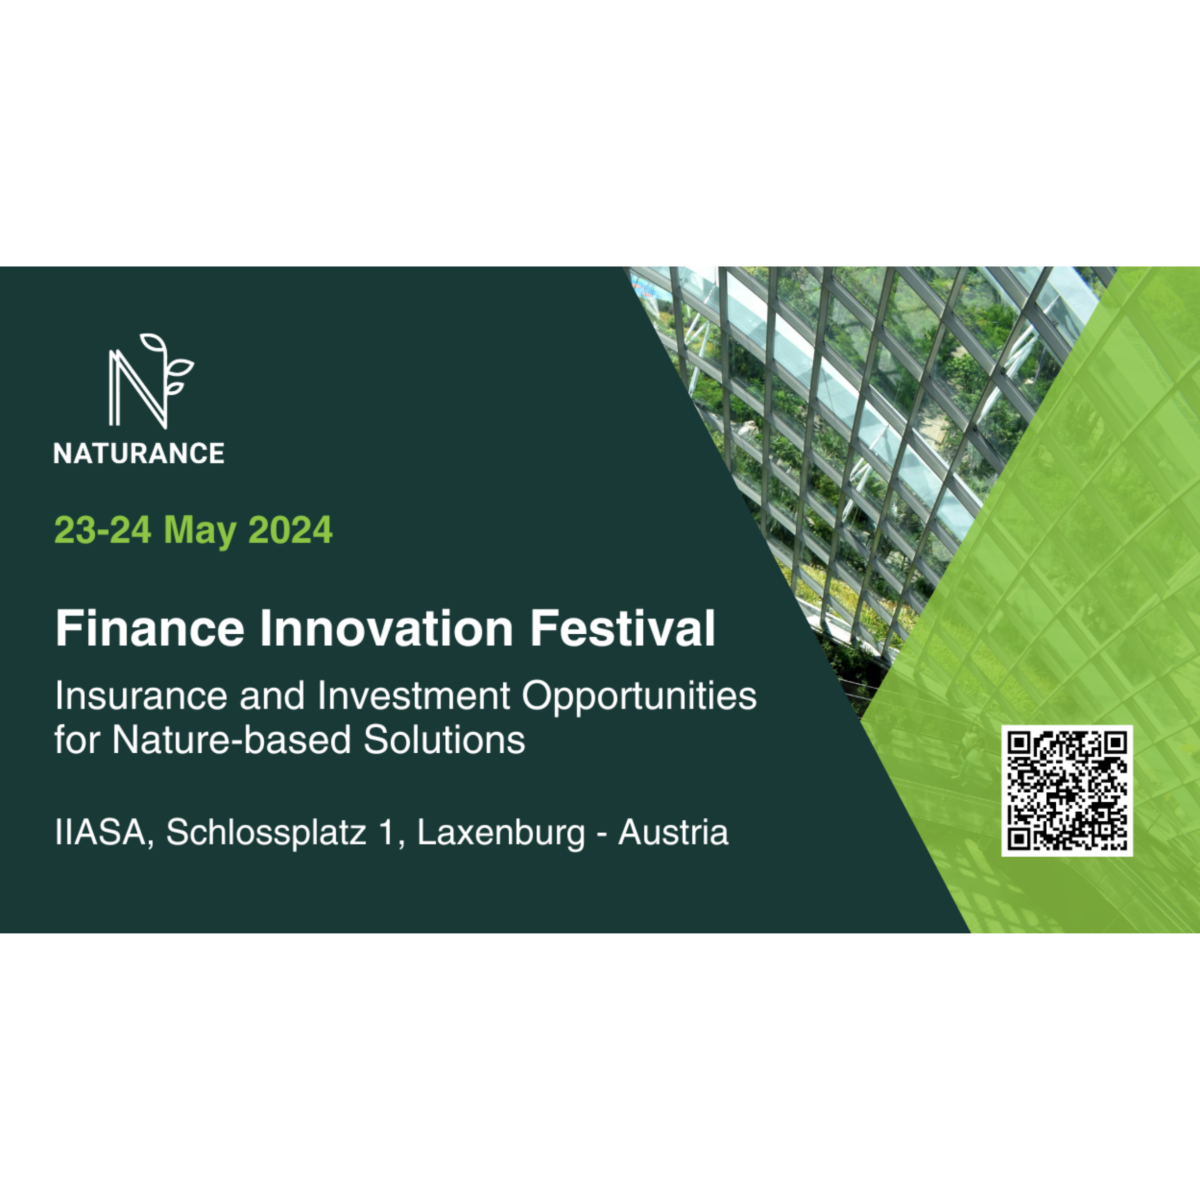 Finance Innovation Festival: Insurance and Investment Opportunities for Nature-based Solutions